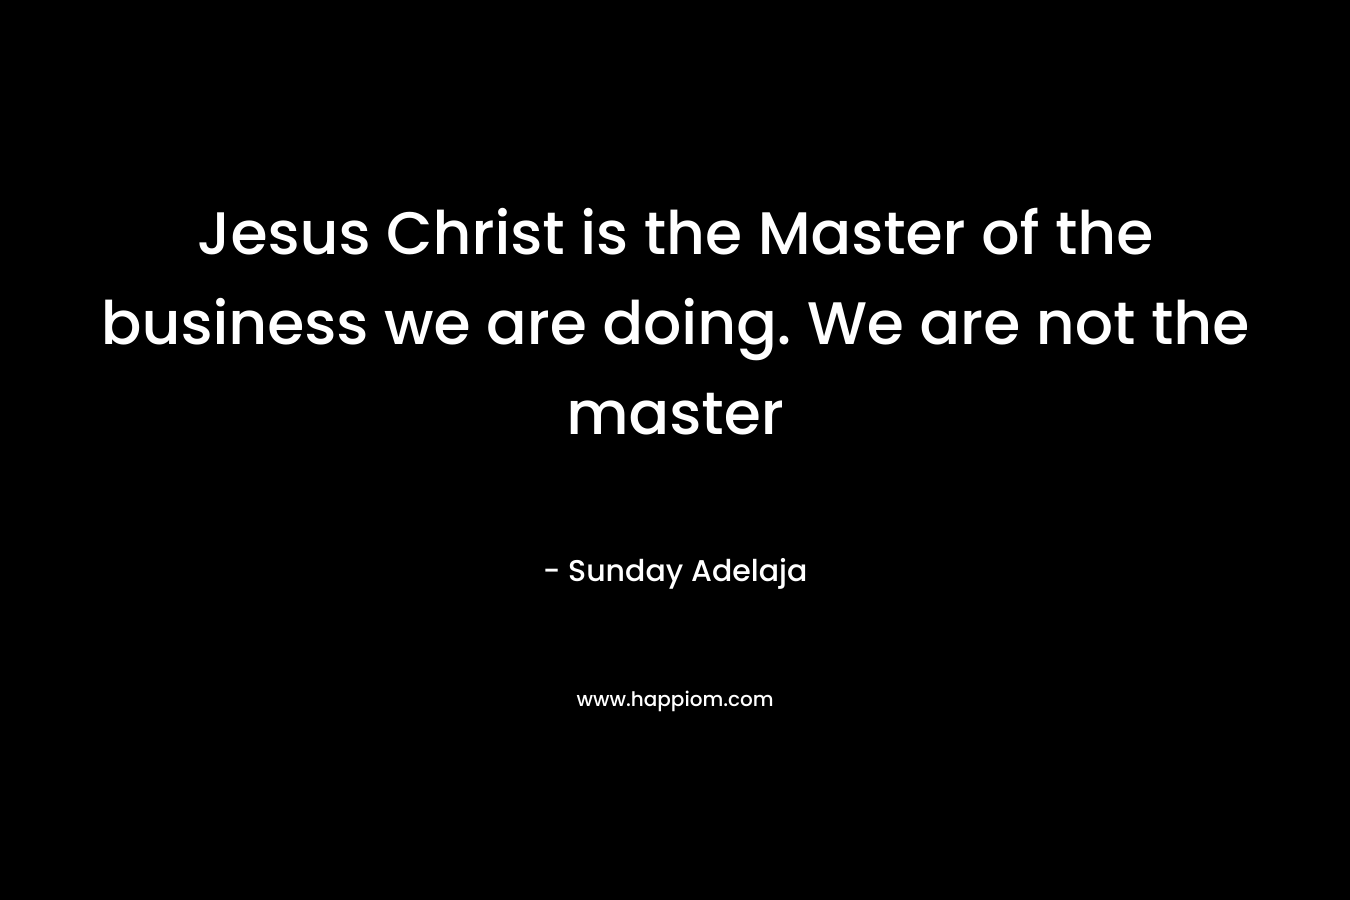 Jesus Christ is the Master of the business we are doing. We are not the master